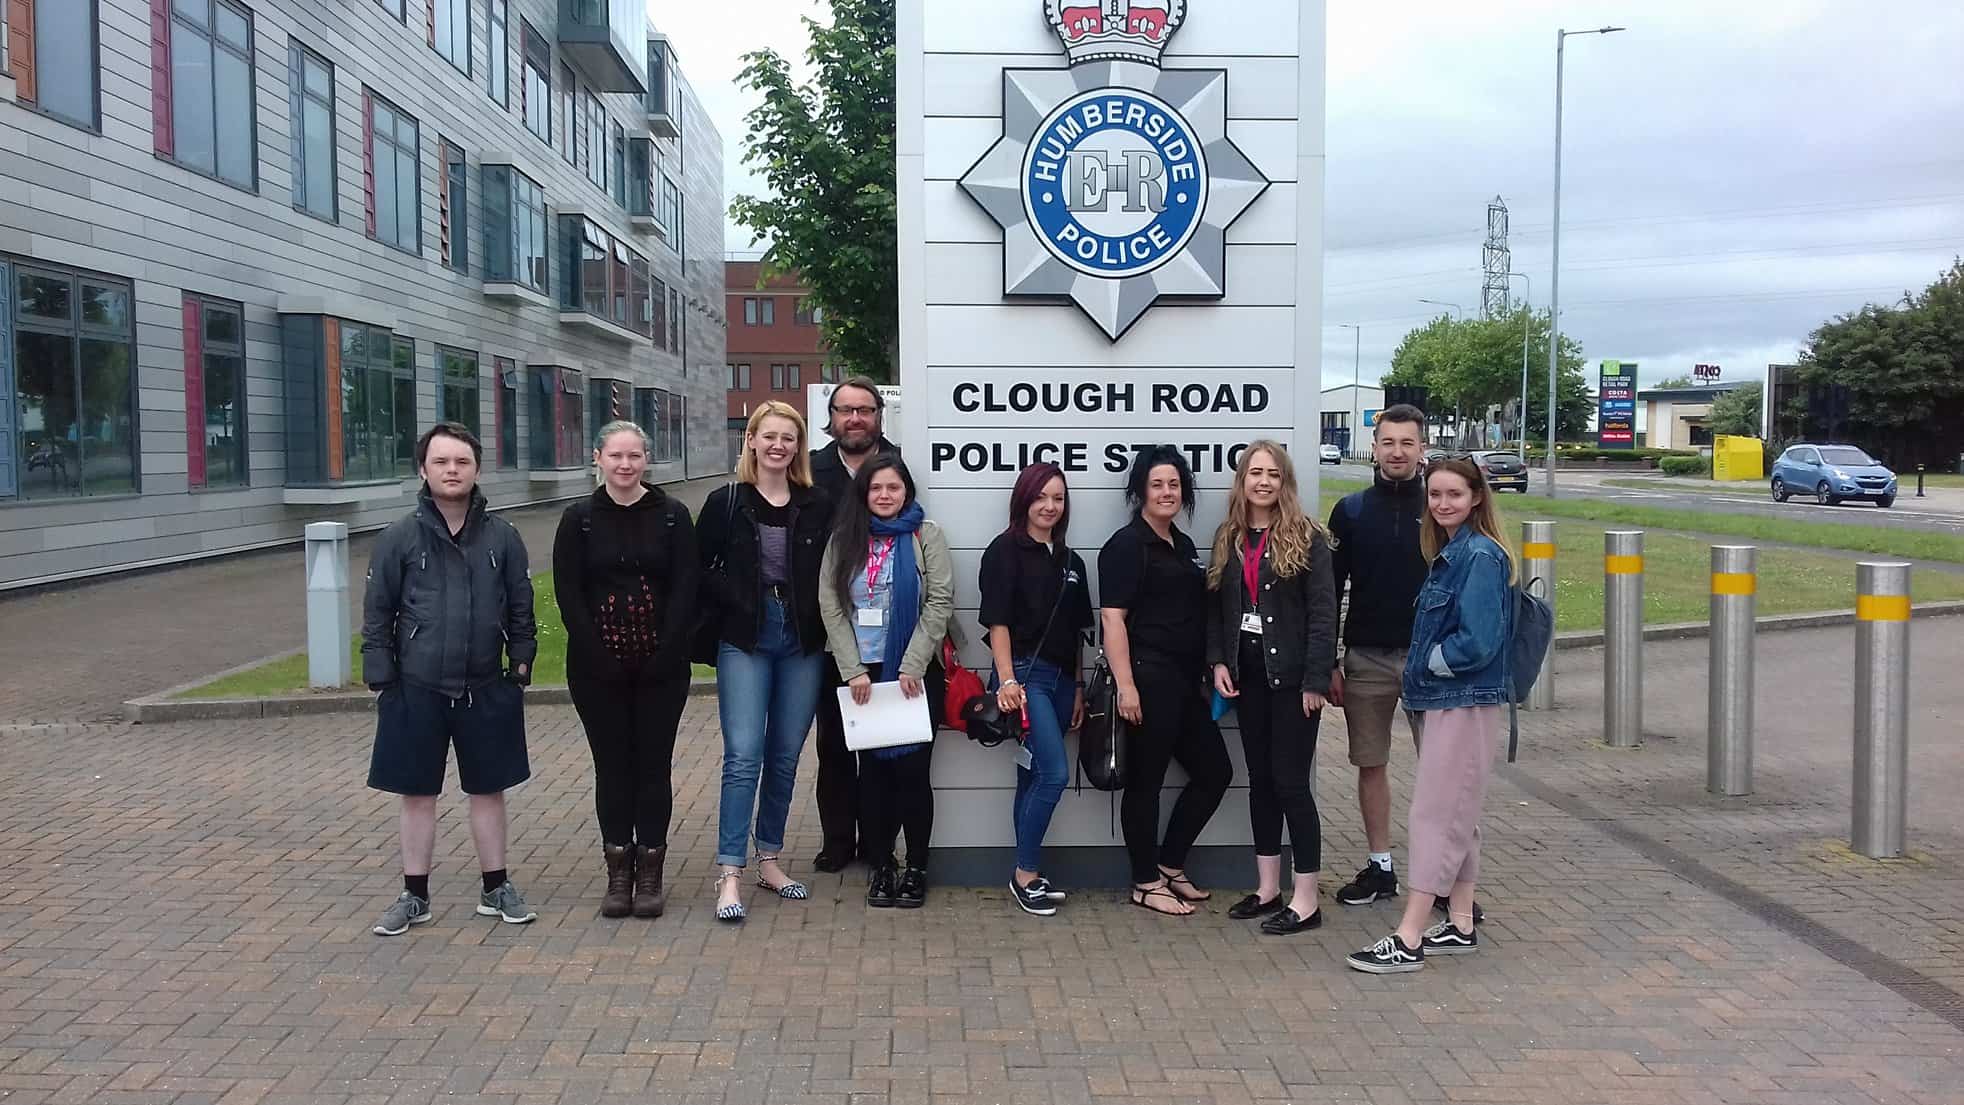 Student Led Volunteering 60th Celebrations – ‘Policing Project’ Success